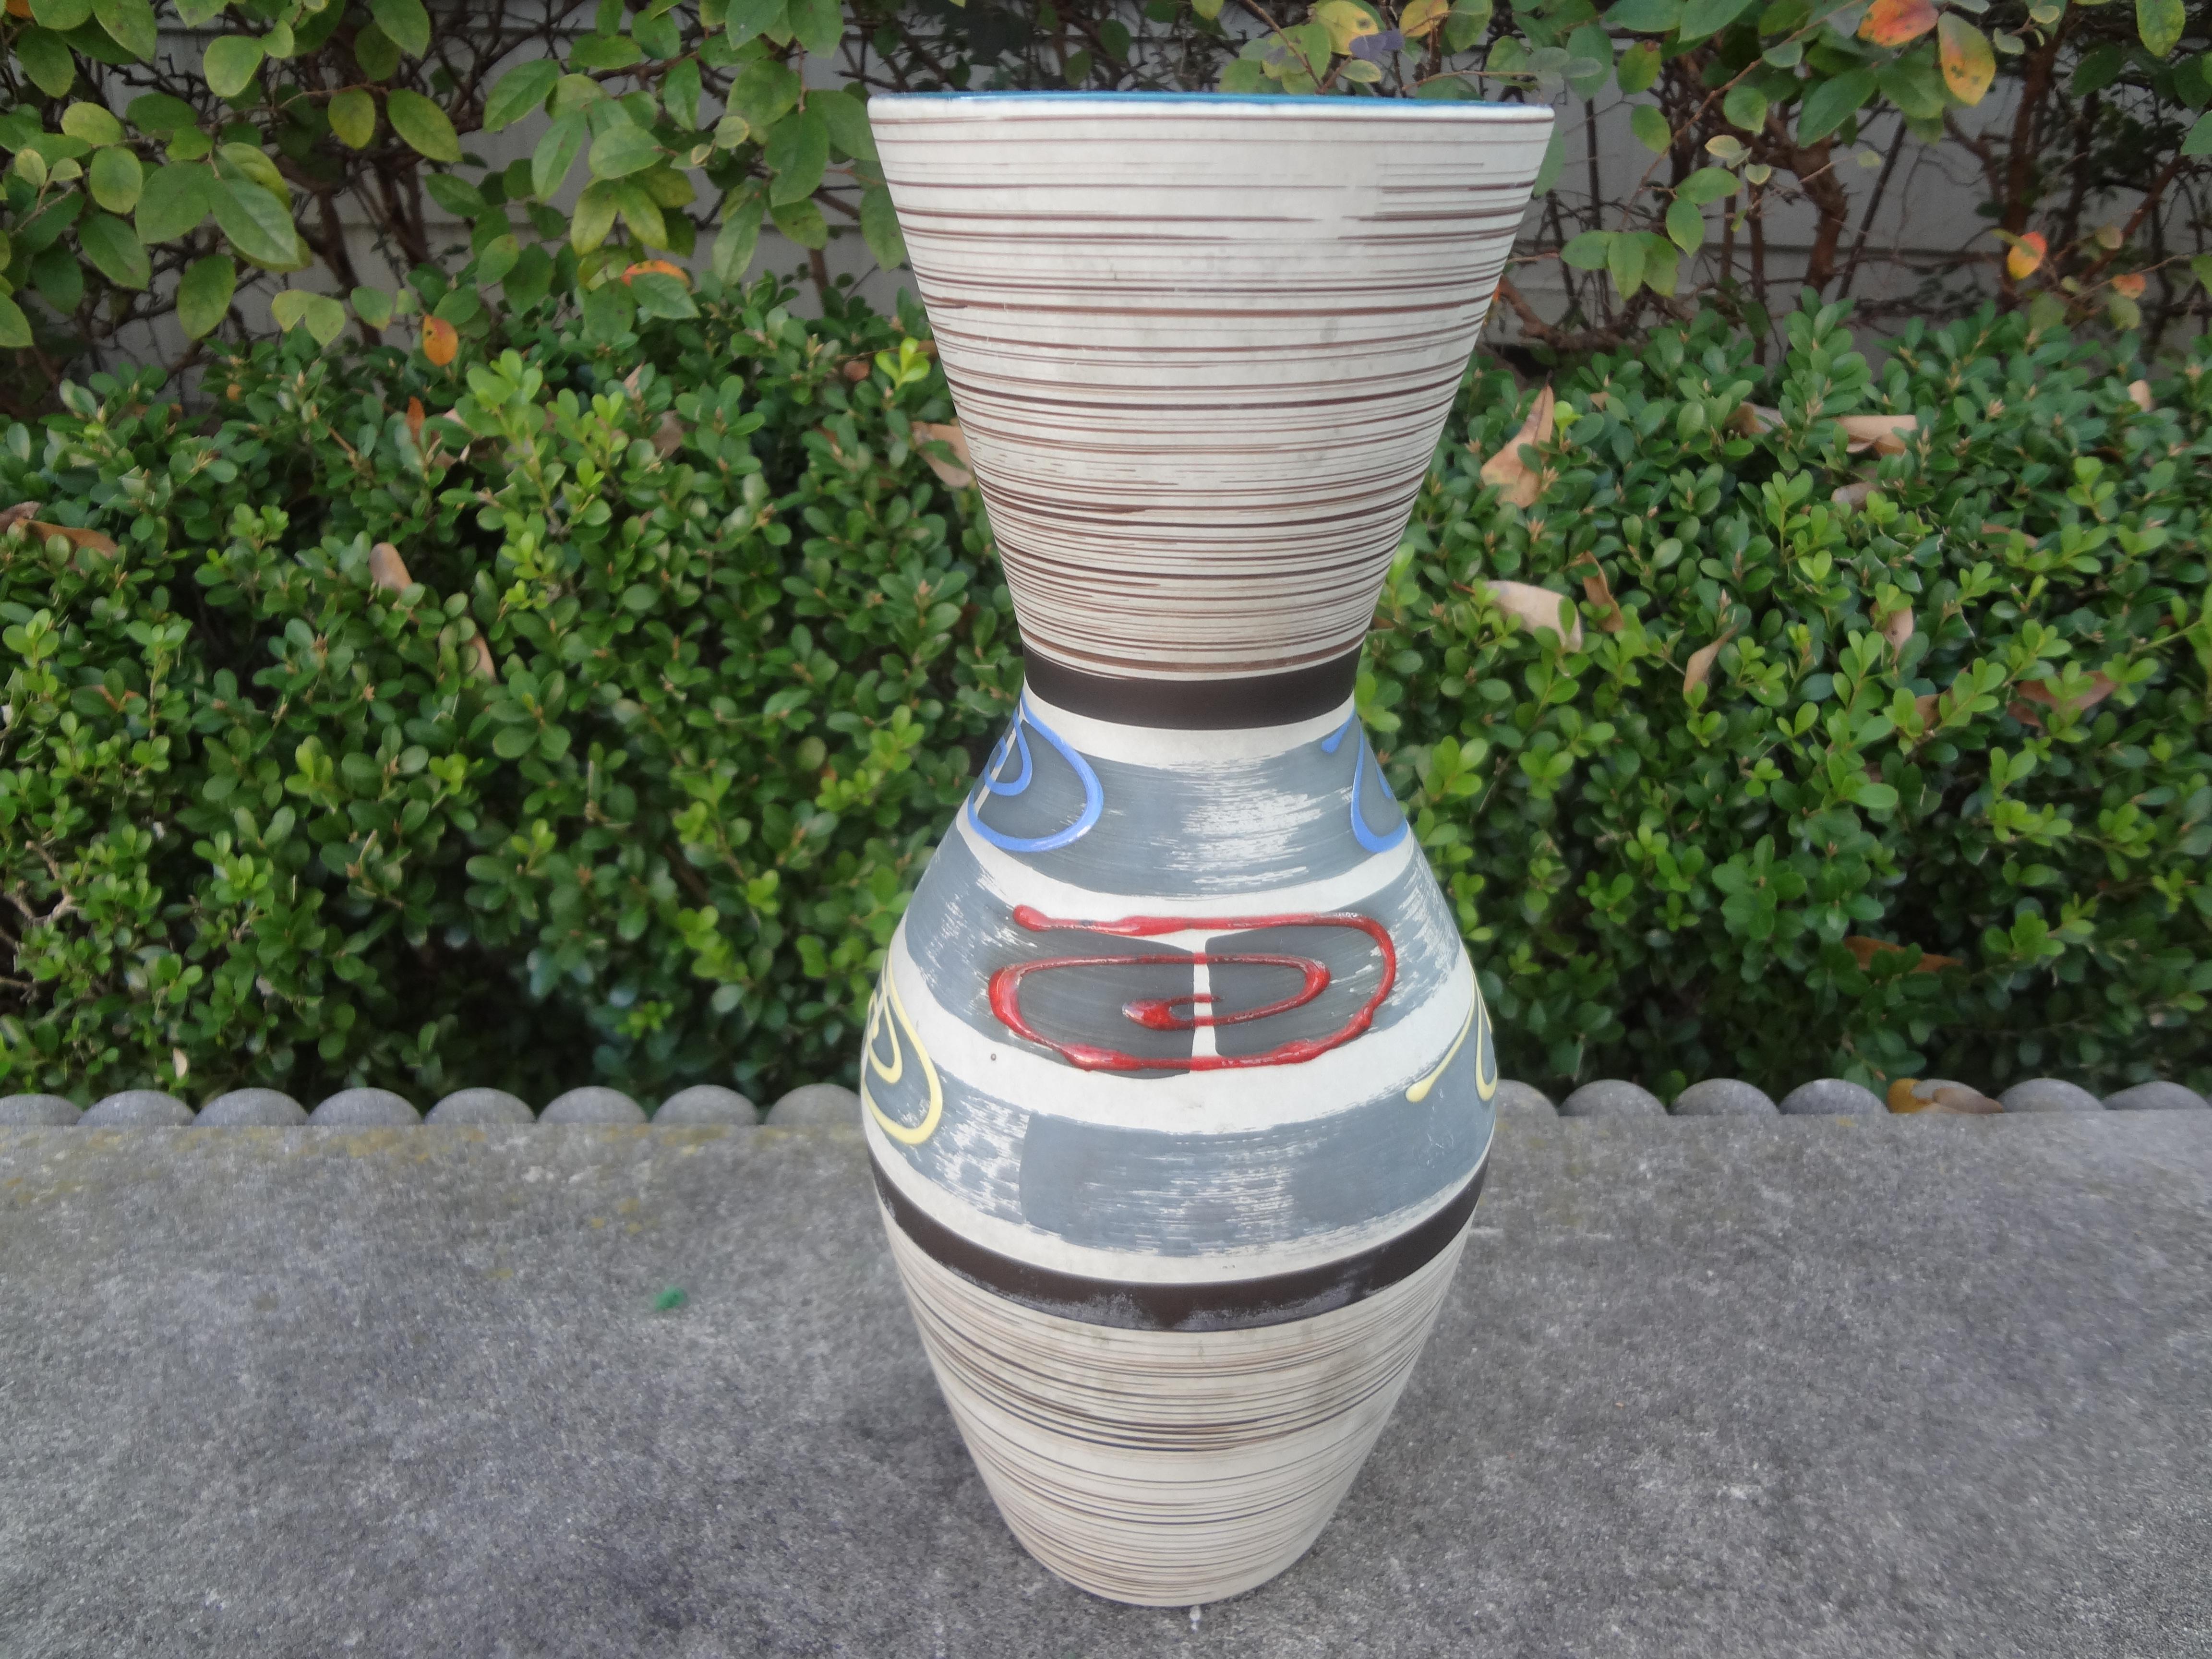 Midcentury West German glazed pottery vase.
Stunning West German glazed pottery vase. This vase has gorgeous geometric shapes in blue, red and yellow.